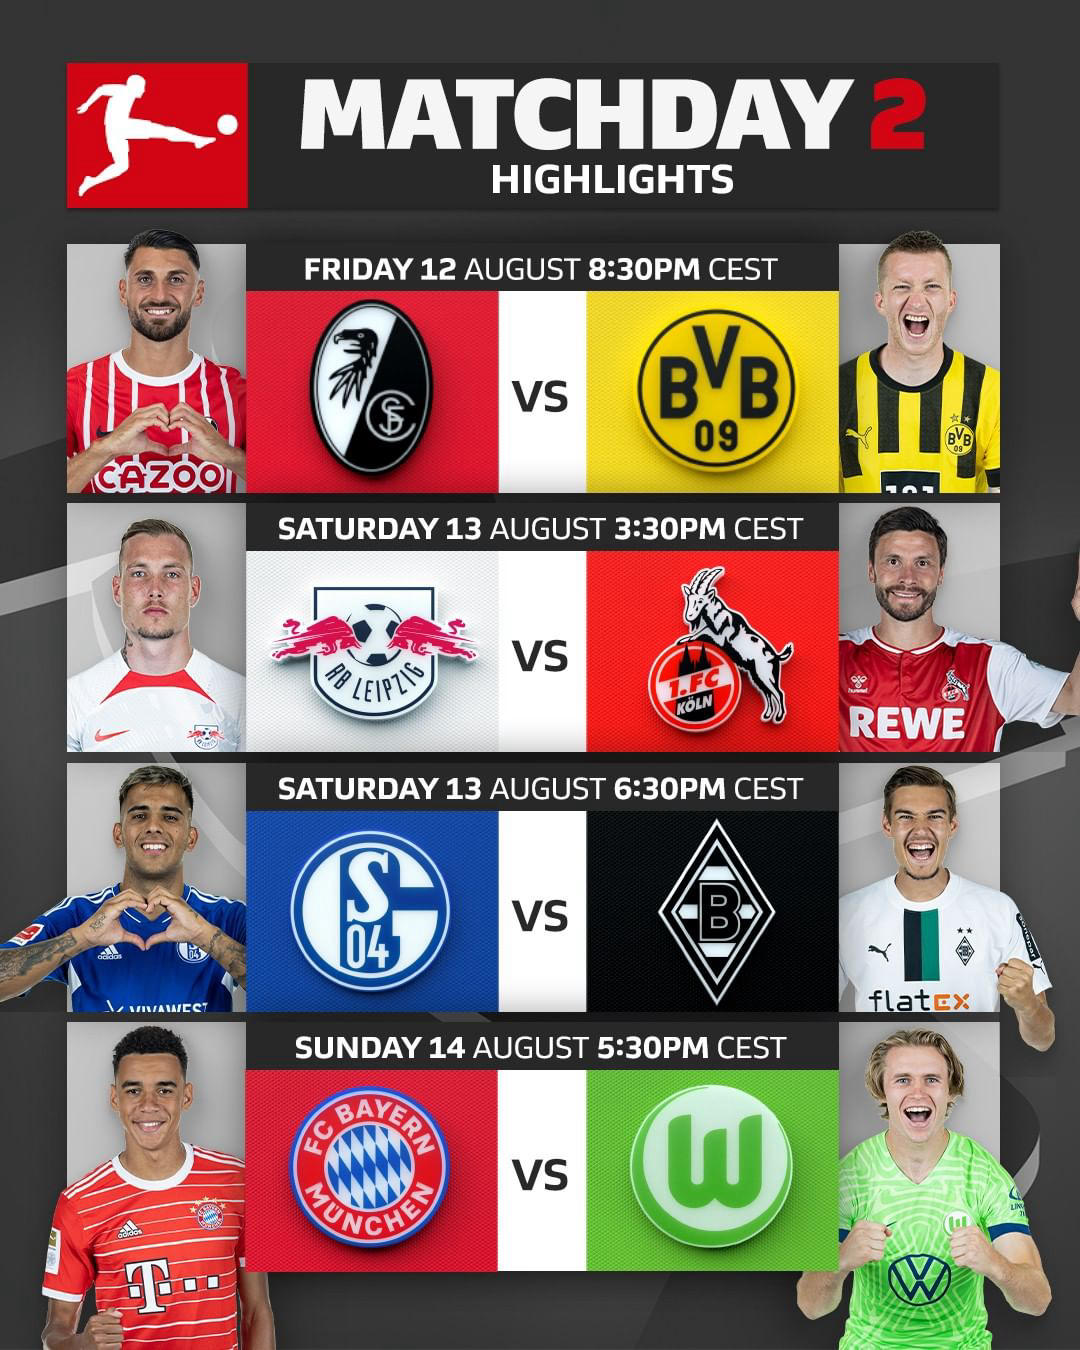 Bundesliga - Where in the world will you be watching #Bundesliga #MD2 from